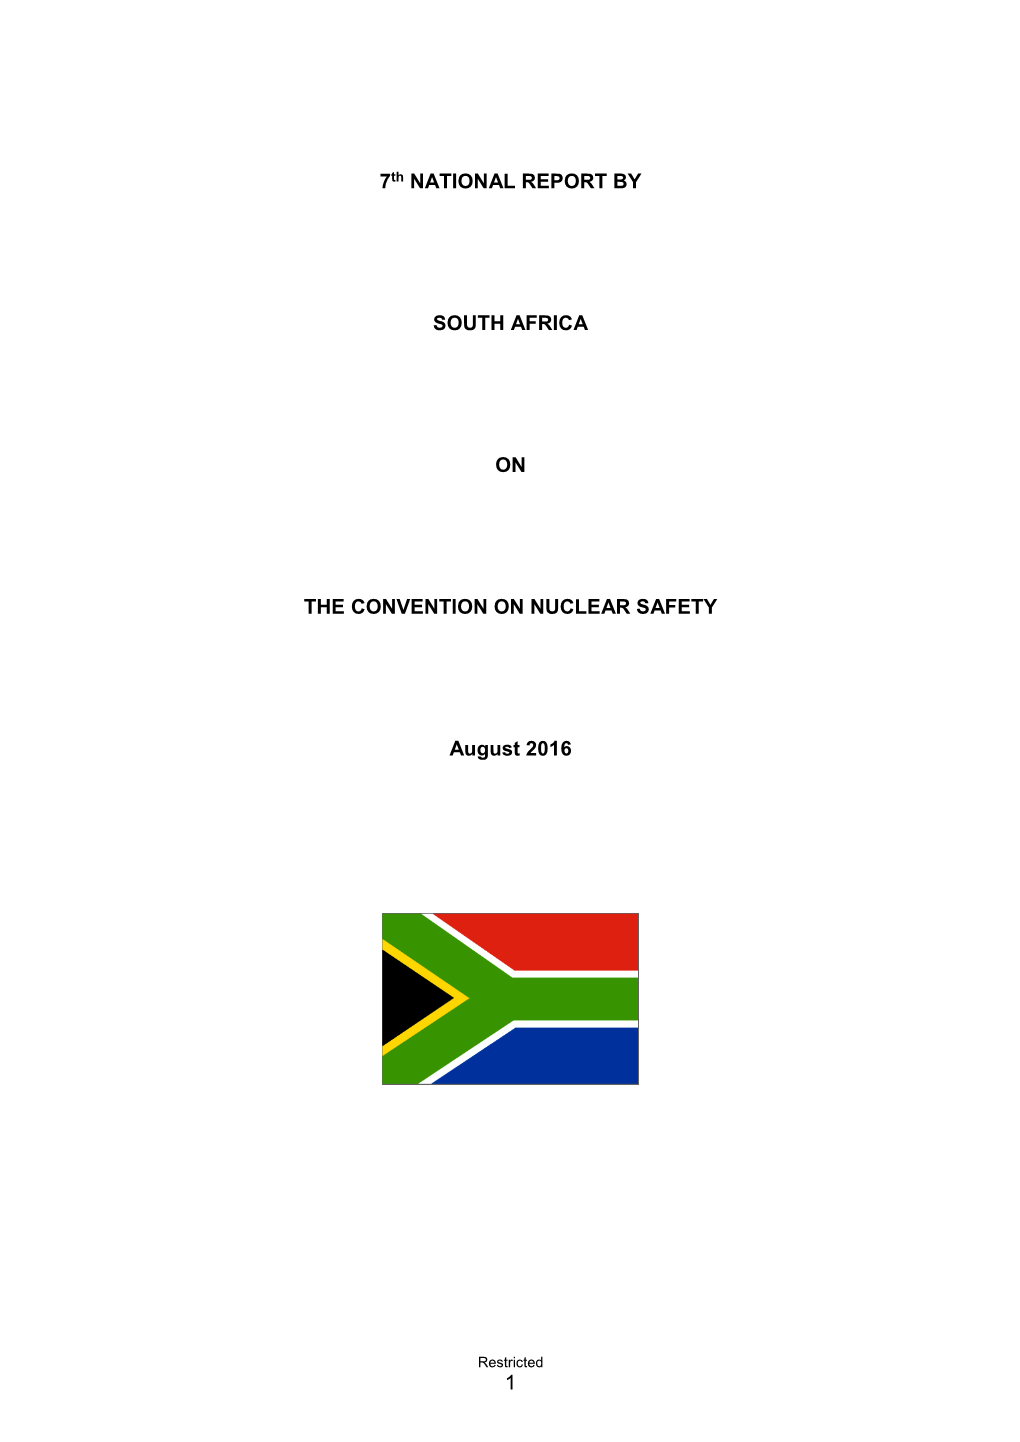 1 7Th NATIONAL REPORT by SOUTH AFRICA on the CONVENTION